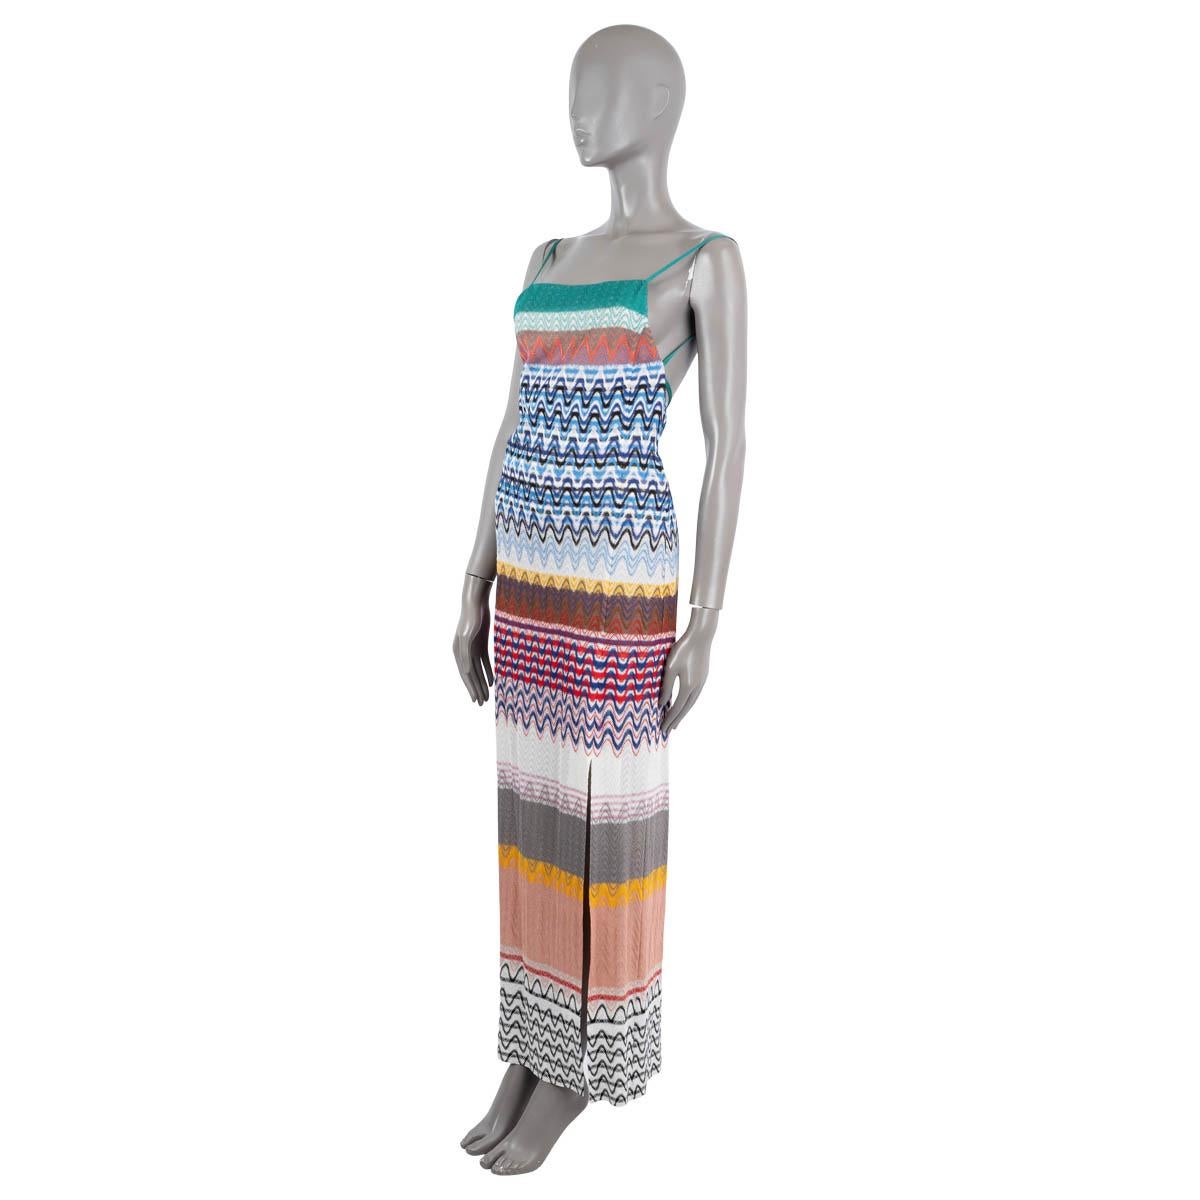 100% authentic Missoni maxi knit dress in multicolored viscose (100%) with stripes of the houses signature chevron knit. Features spaghetti straps, an open back and high slit on the side. Closes with a zipper in the back and is lined in silk (with